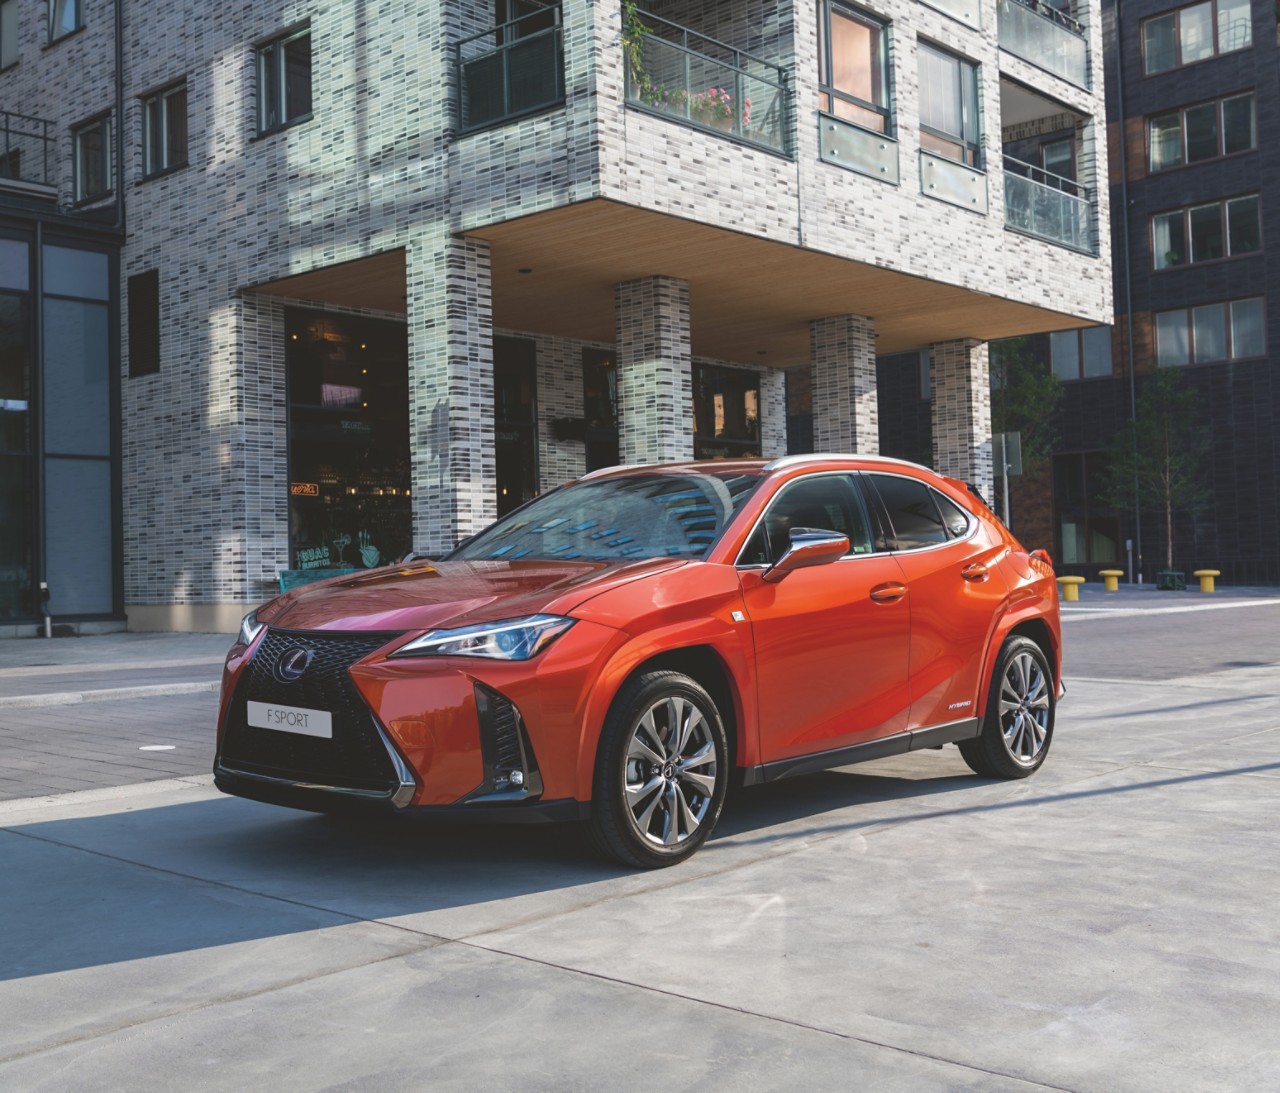 Lexus UX MY22 driving on a road